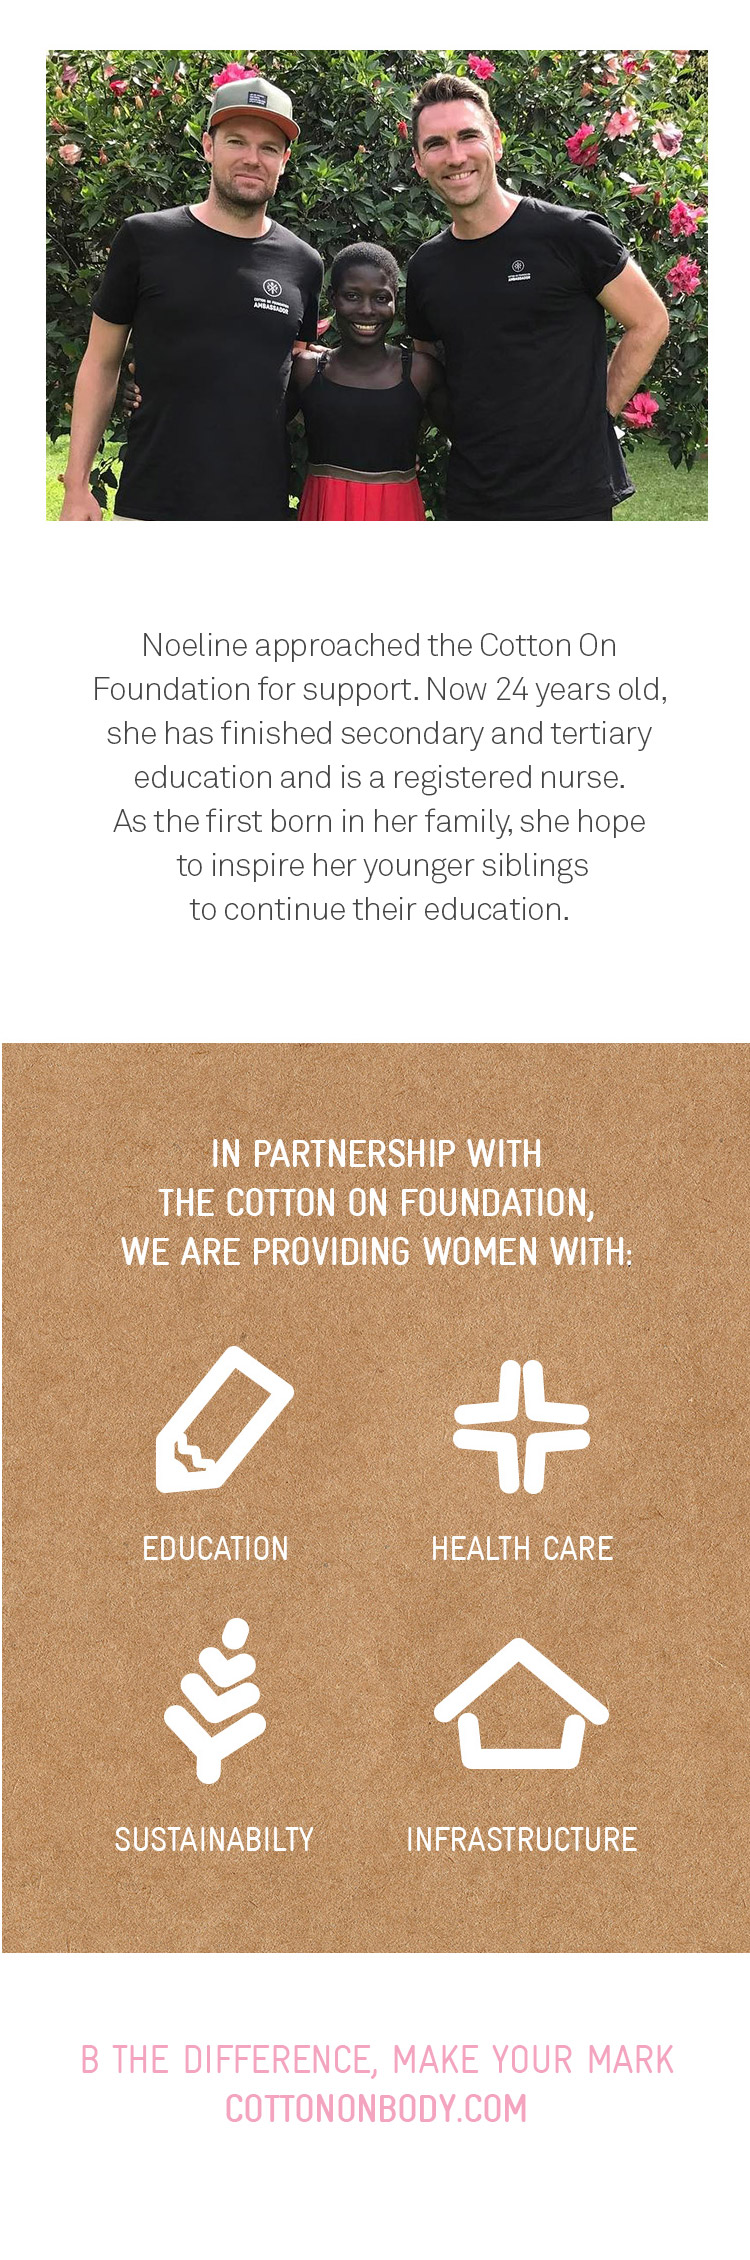 Noeline approached the Cotton On Foundation for support. Now 24 years old, she has finished secondary and tertiary education and is a registered nurse. 